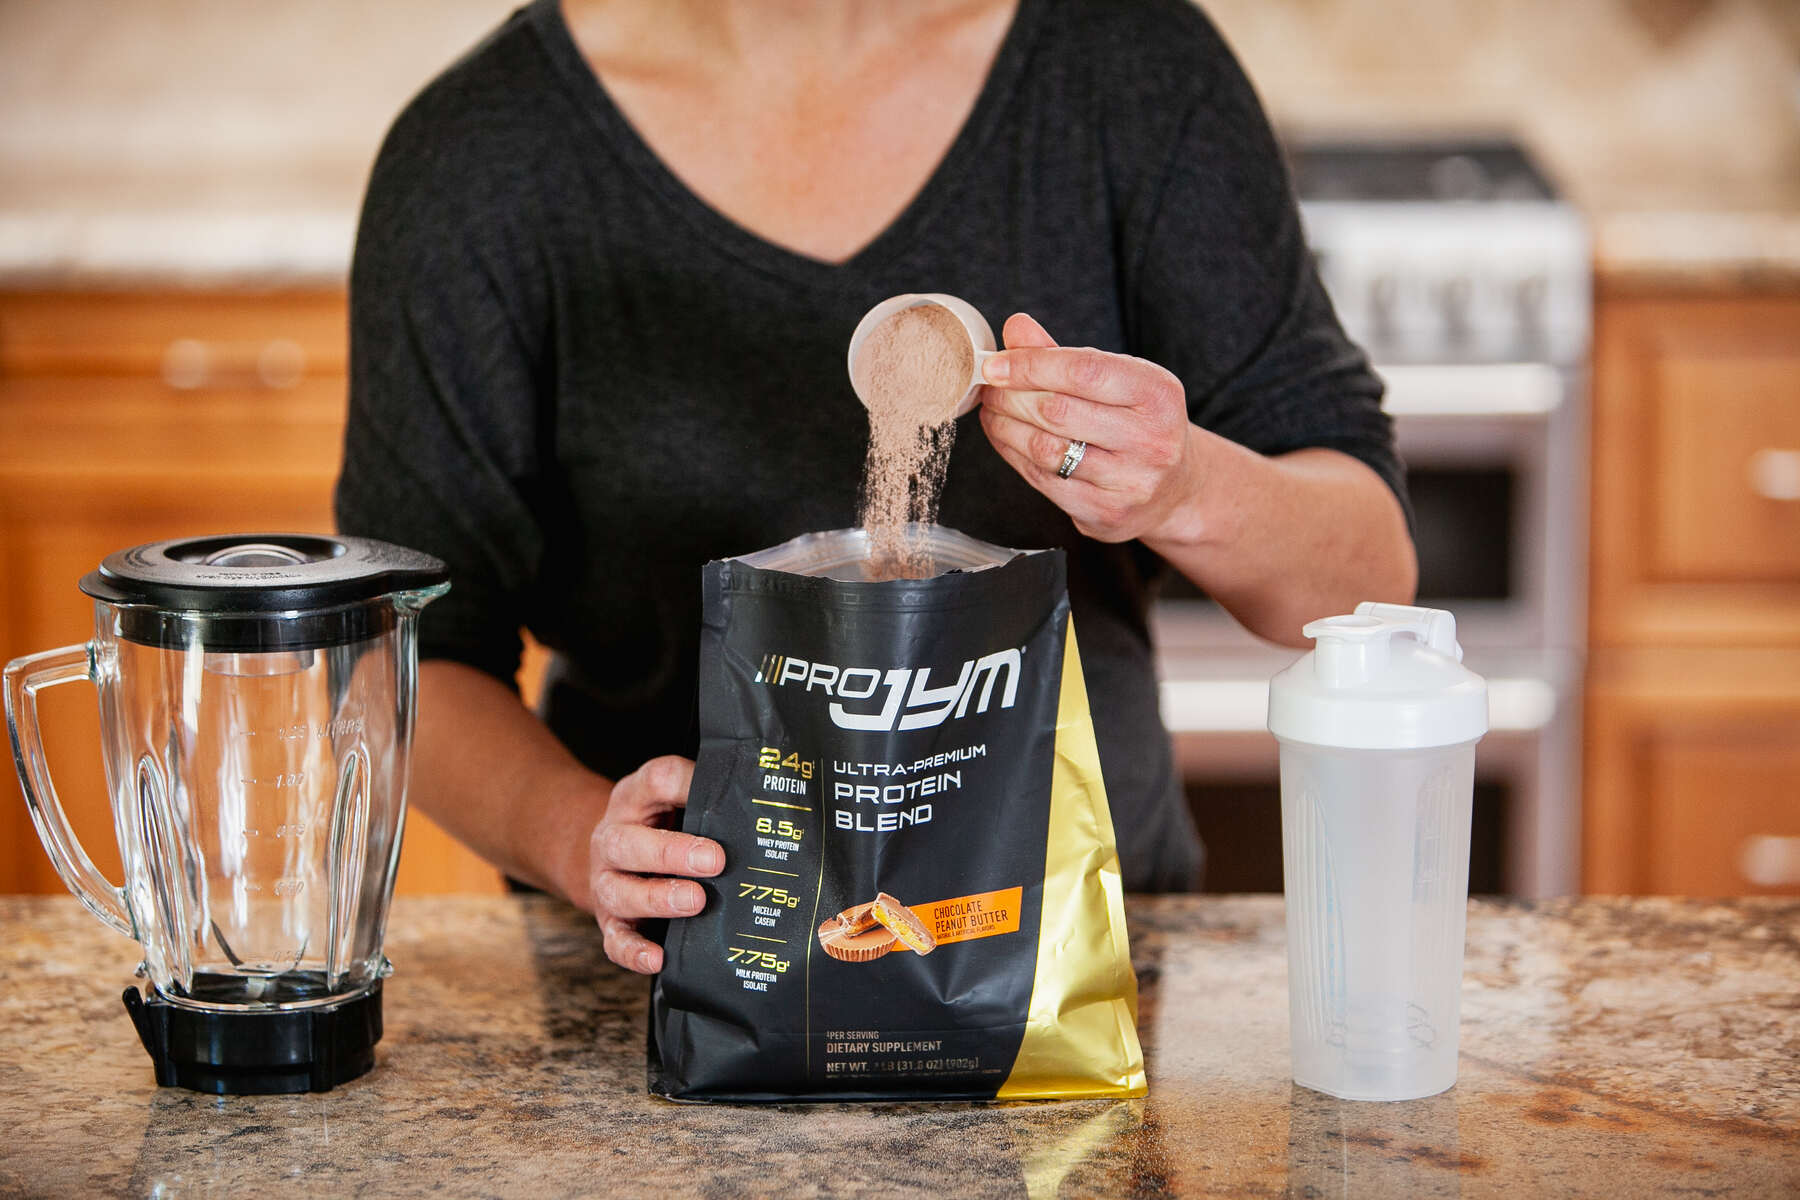 Woman in a black shirt pouring ProJym protein powder into the bag next to a blender and water bottle on a kitchen counter